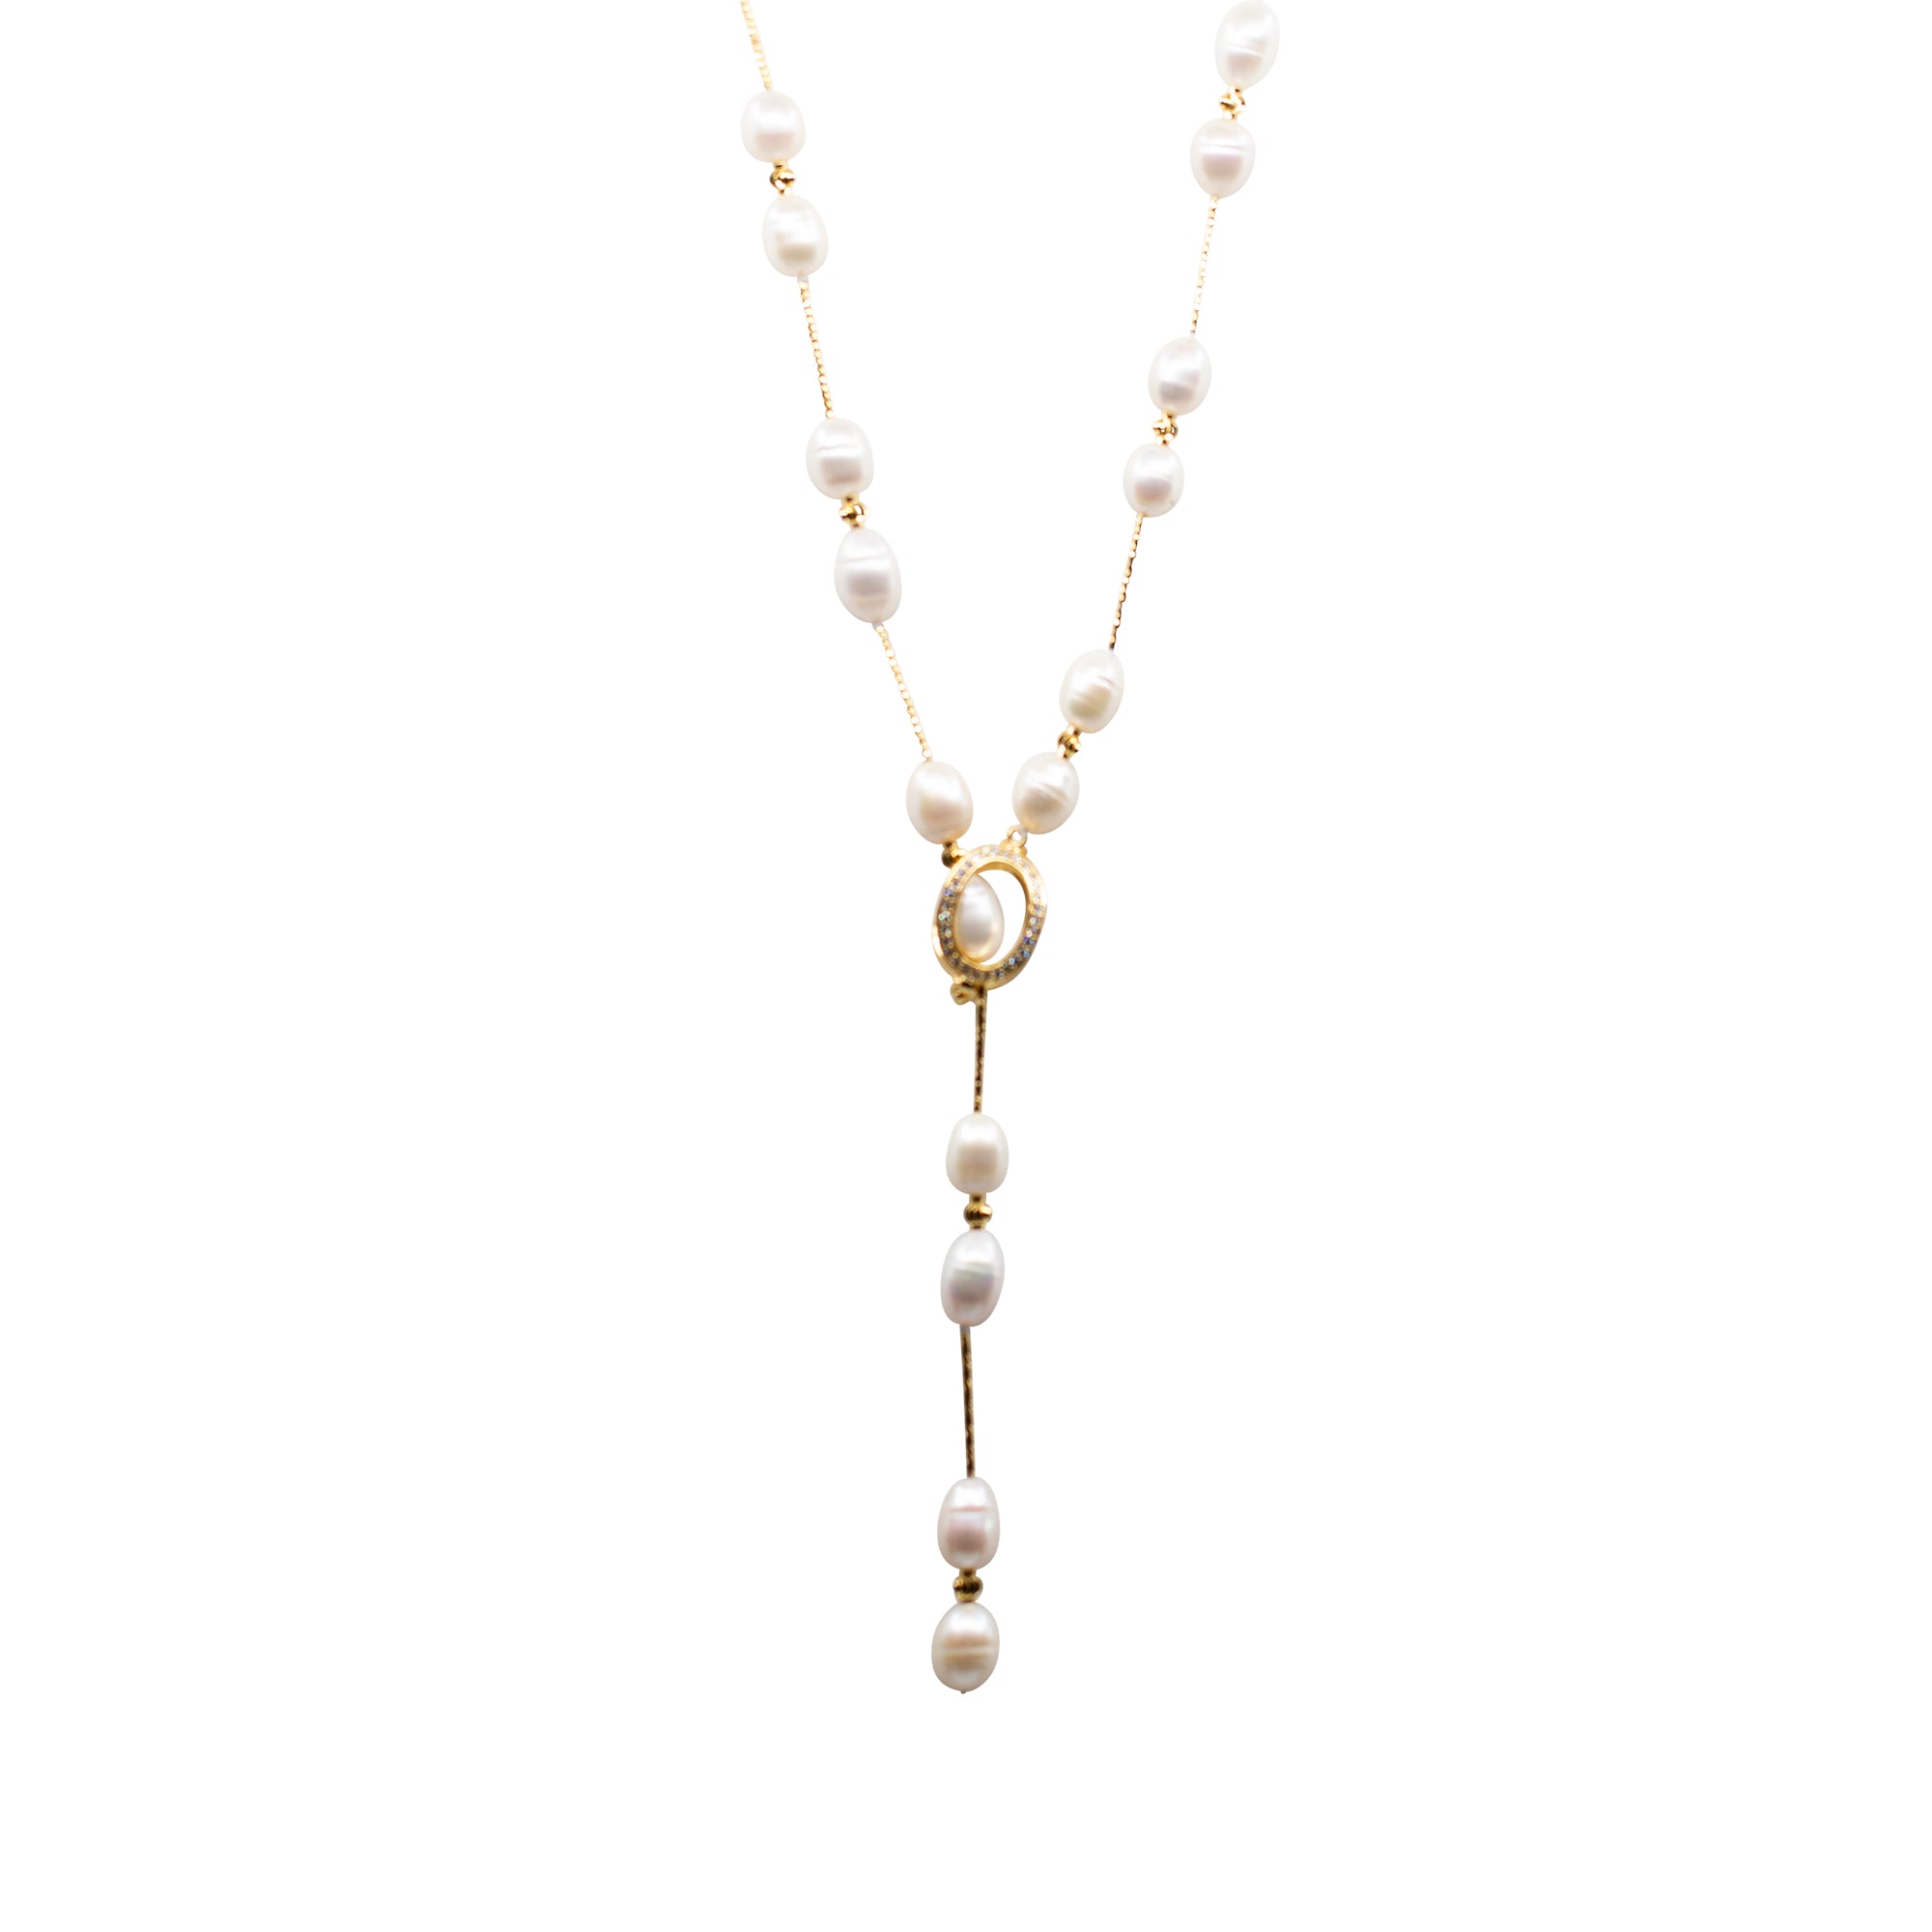 Peggy - Gold-Tone Freshwater Pearl Necklace - The Freshwater Pearl Company